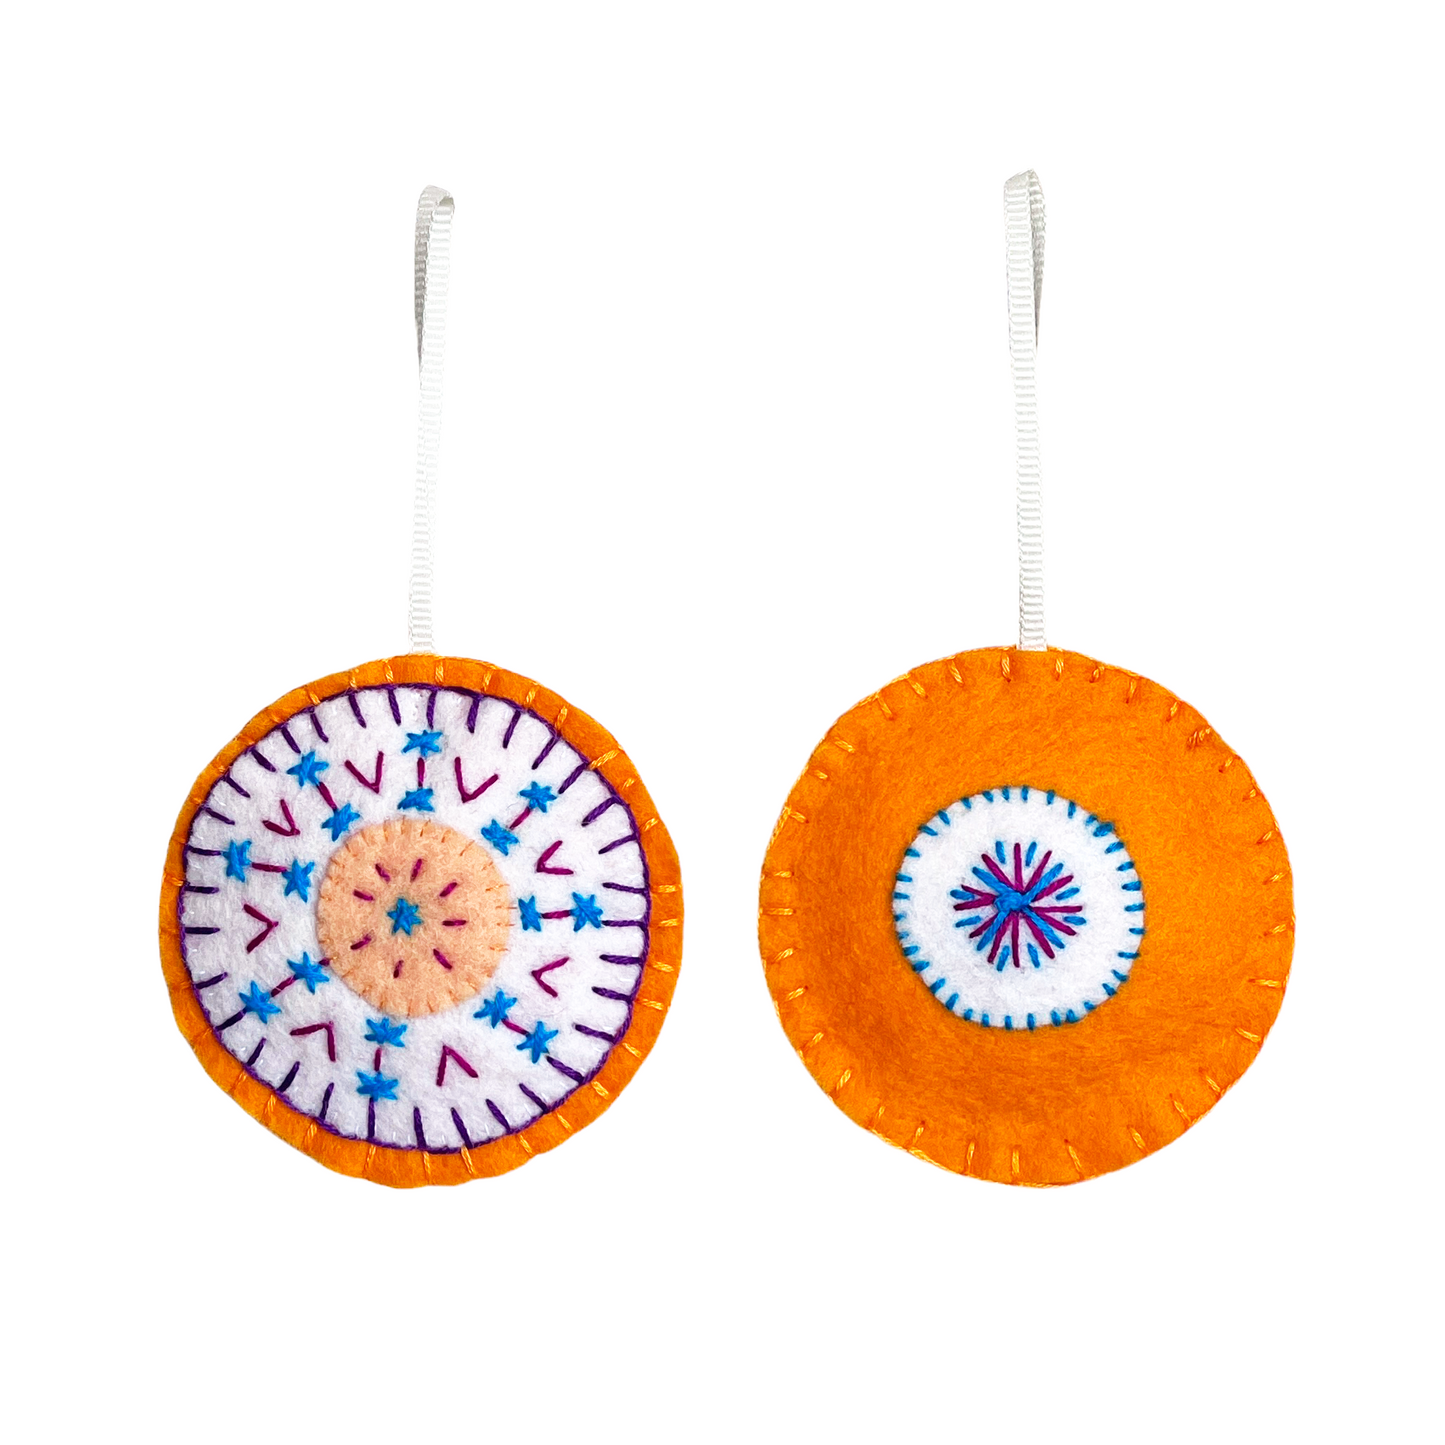 This Mini Mandala ornament features concentric circles of peach, white, and orange felt with a matching orange felt back. Both sides are embroidered using purple, magentaq, and turquoise threads in a symmetrical, mandala-inspired design.